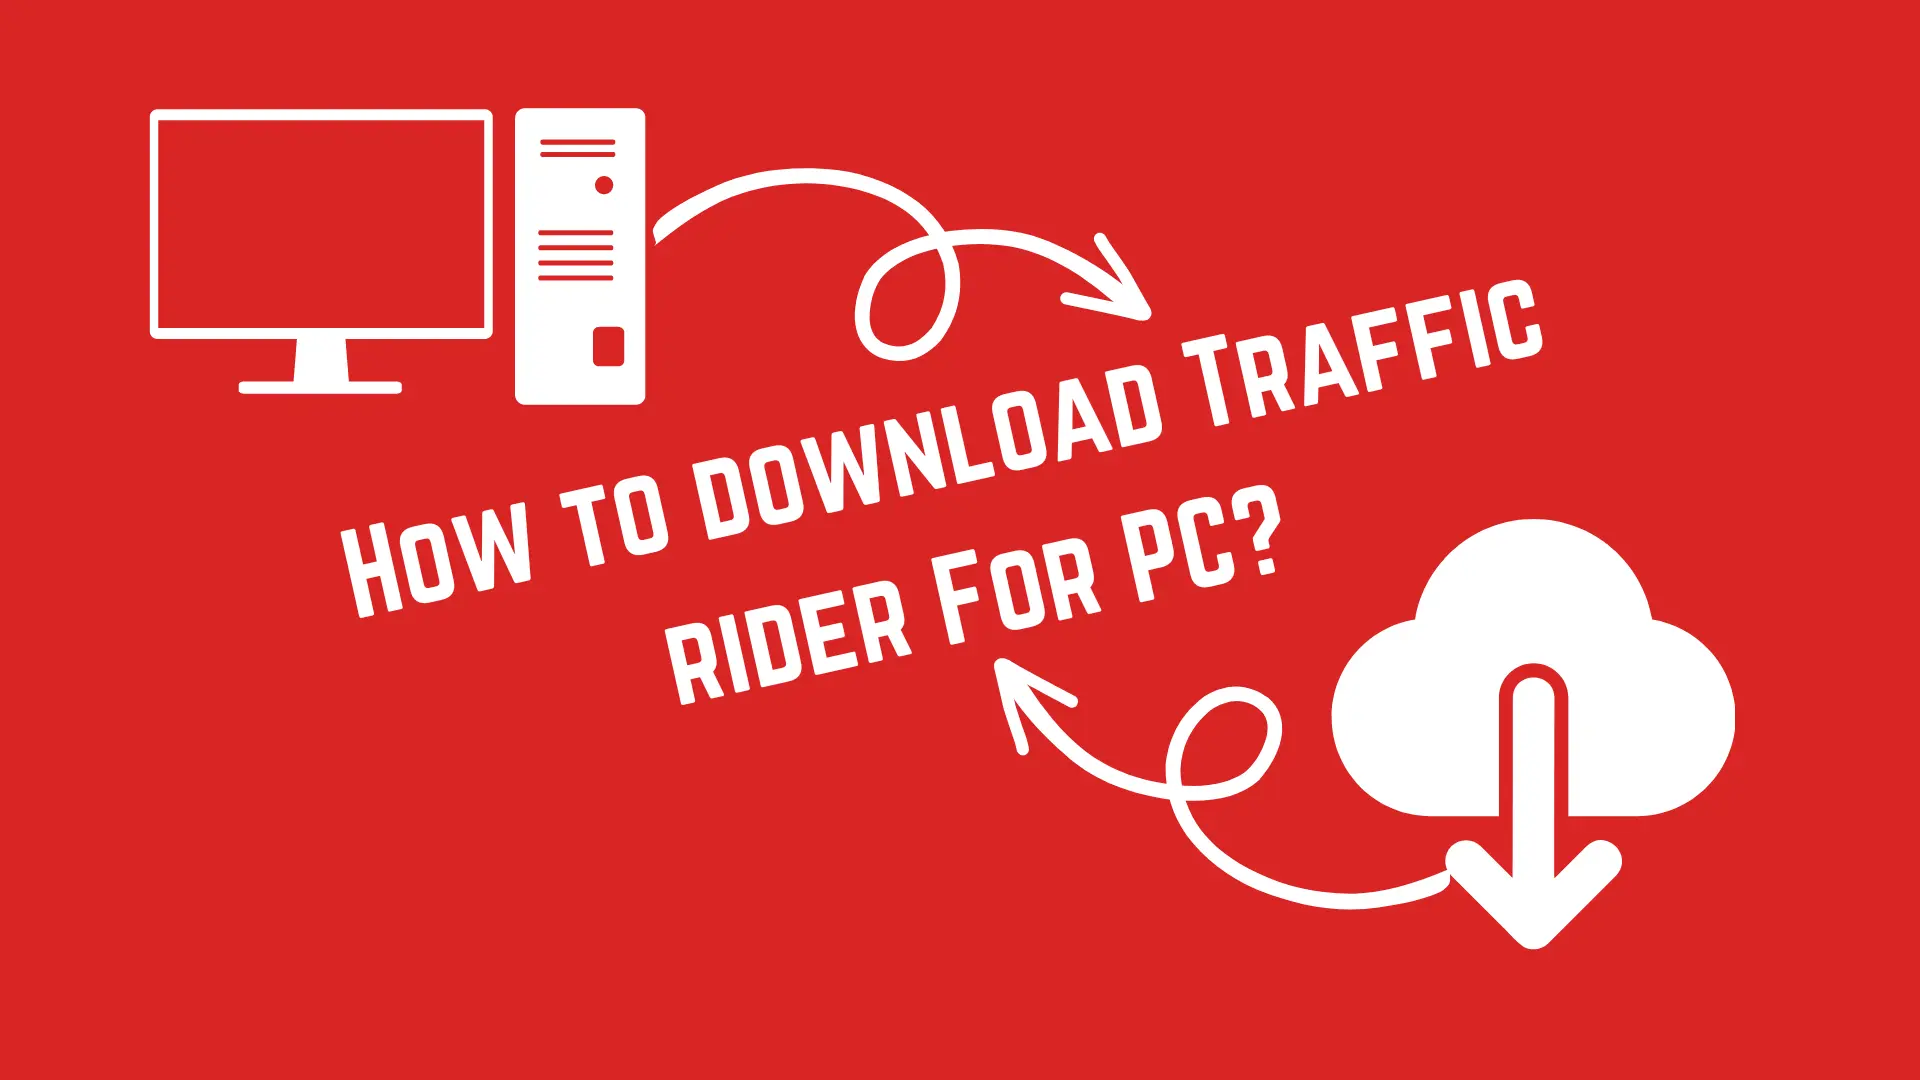 How to download Traffic rider for PC